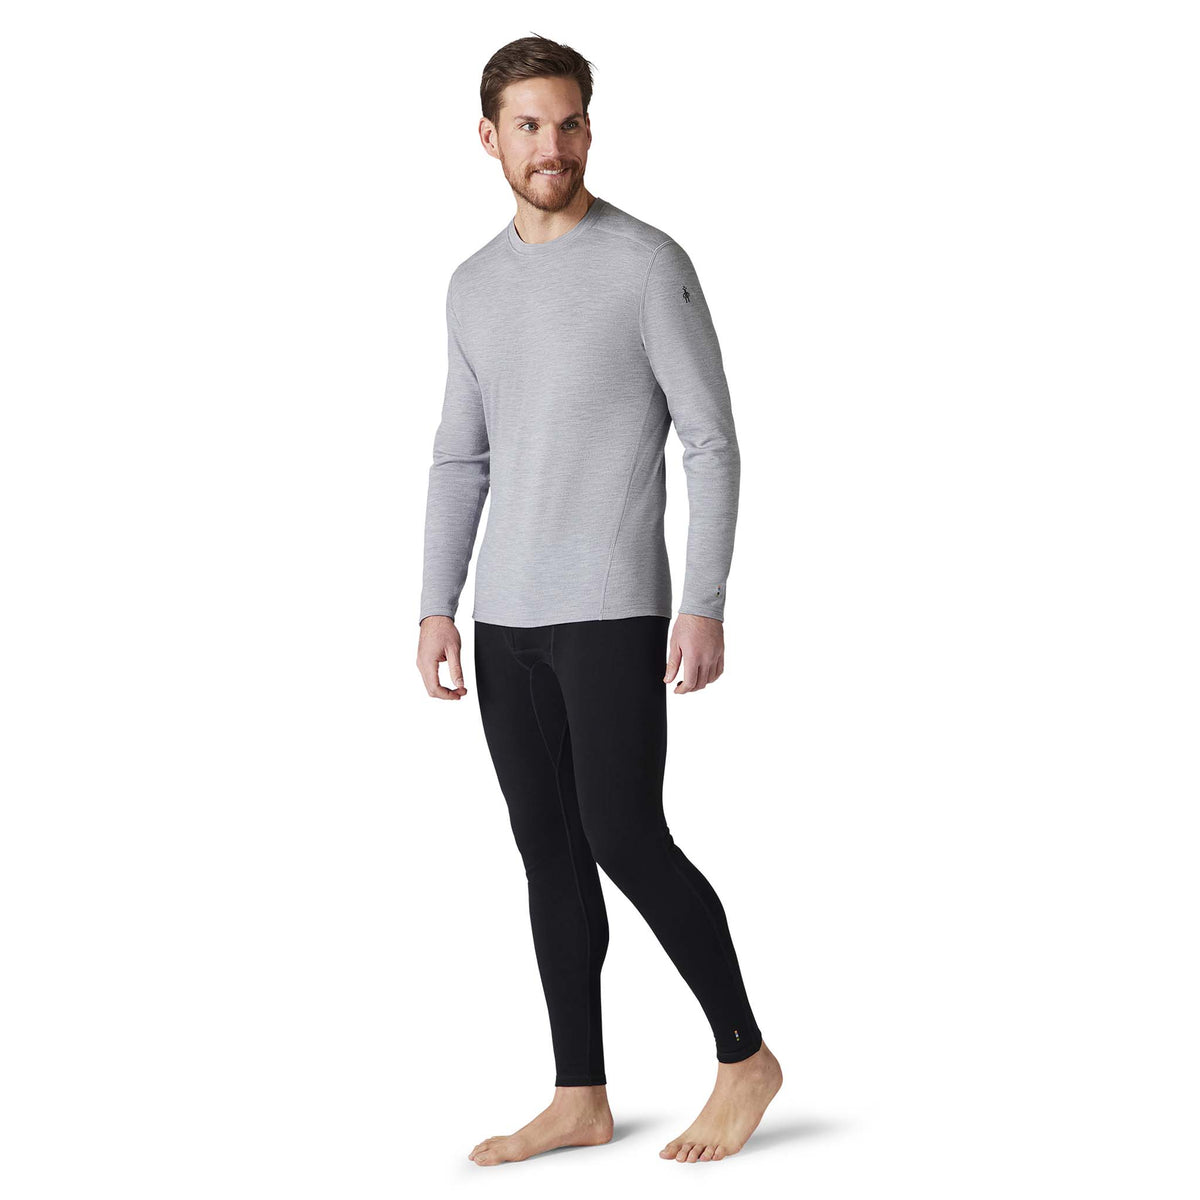 Smartwool Merino 250 Baselayer chandail col rond gris homme face